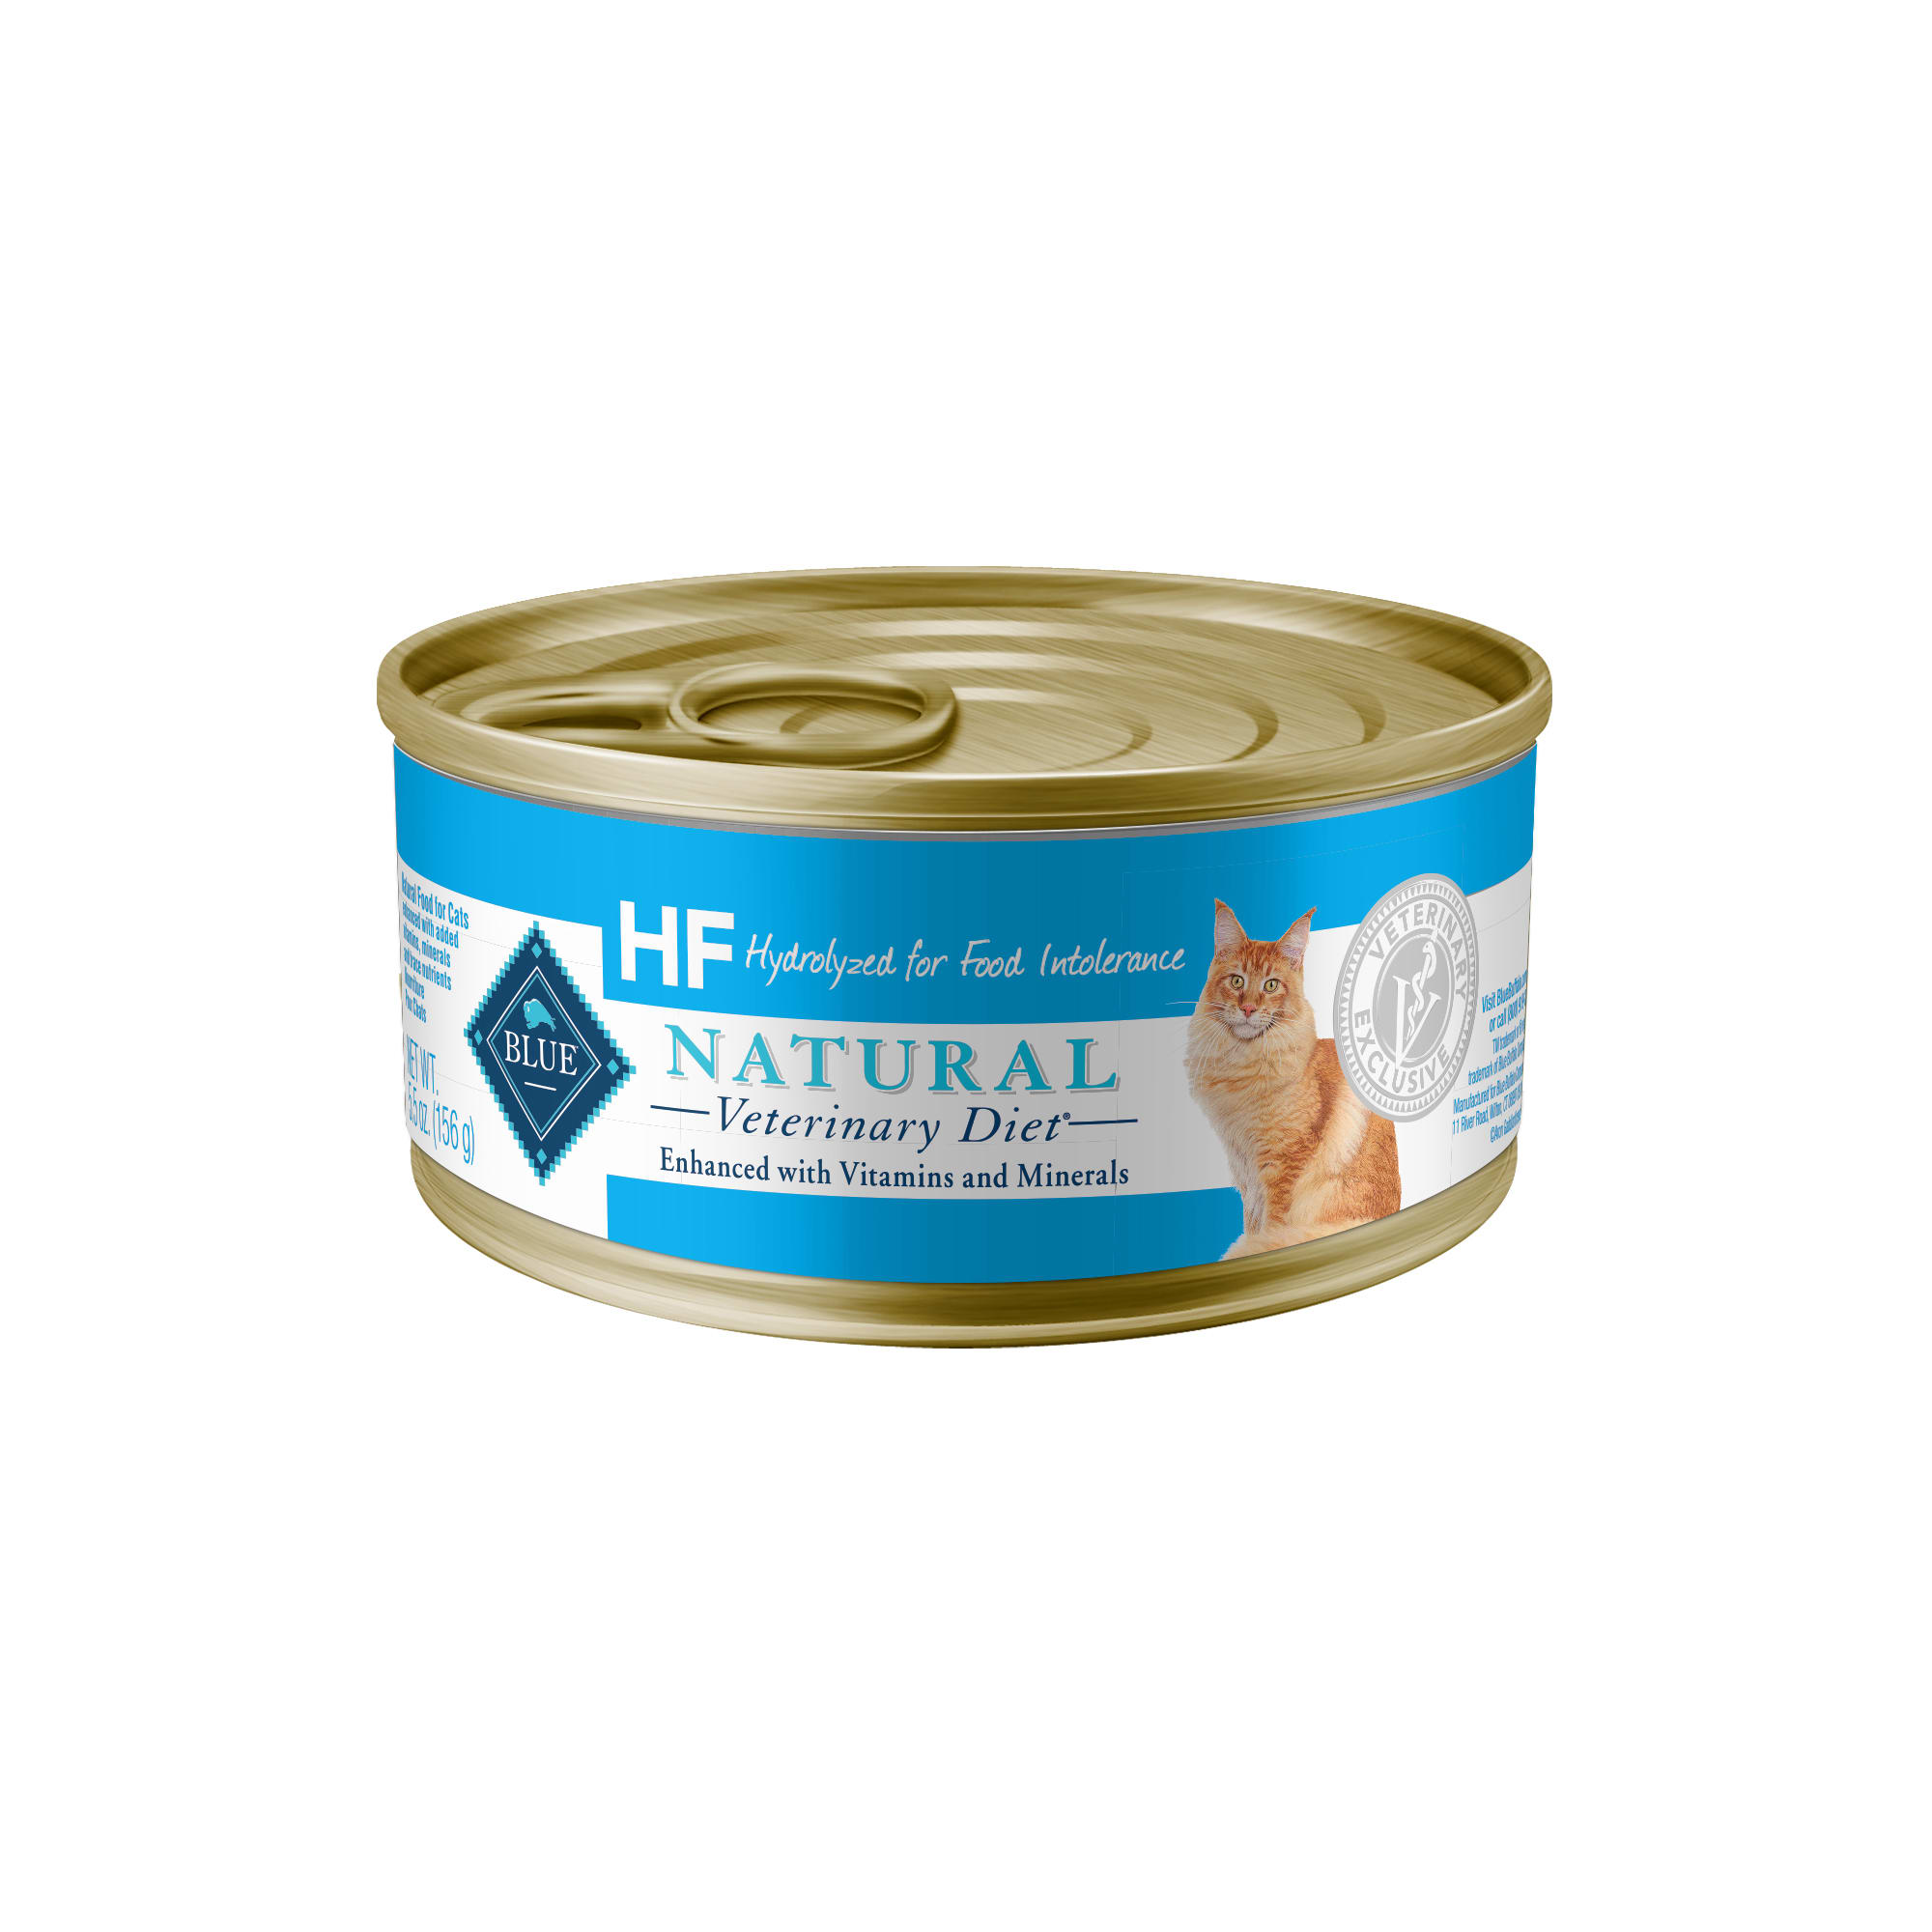 Blue Buffalo Blue Natural Veterinary Diet HF Hydrolyzed for Food